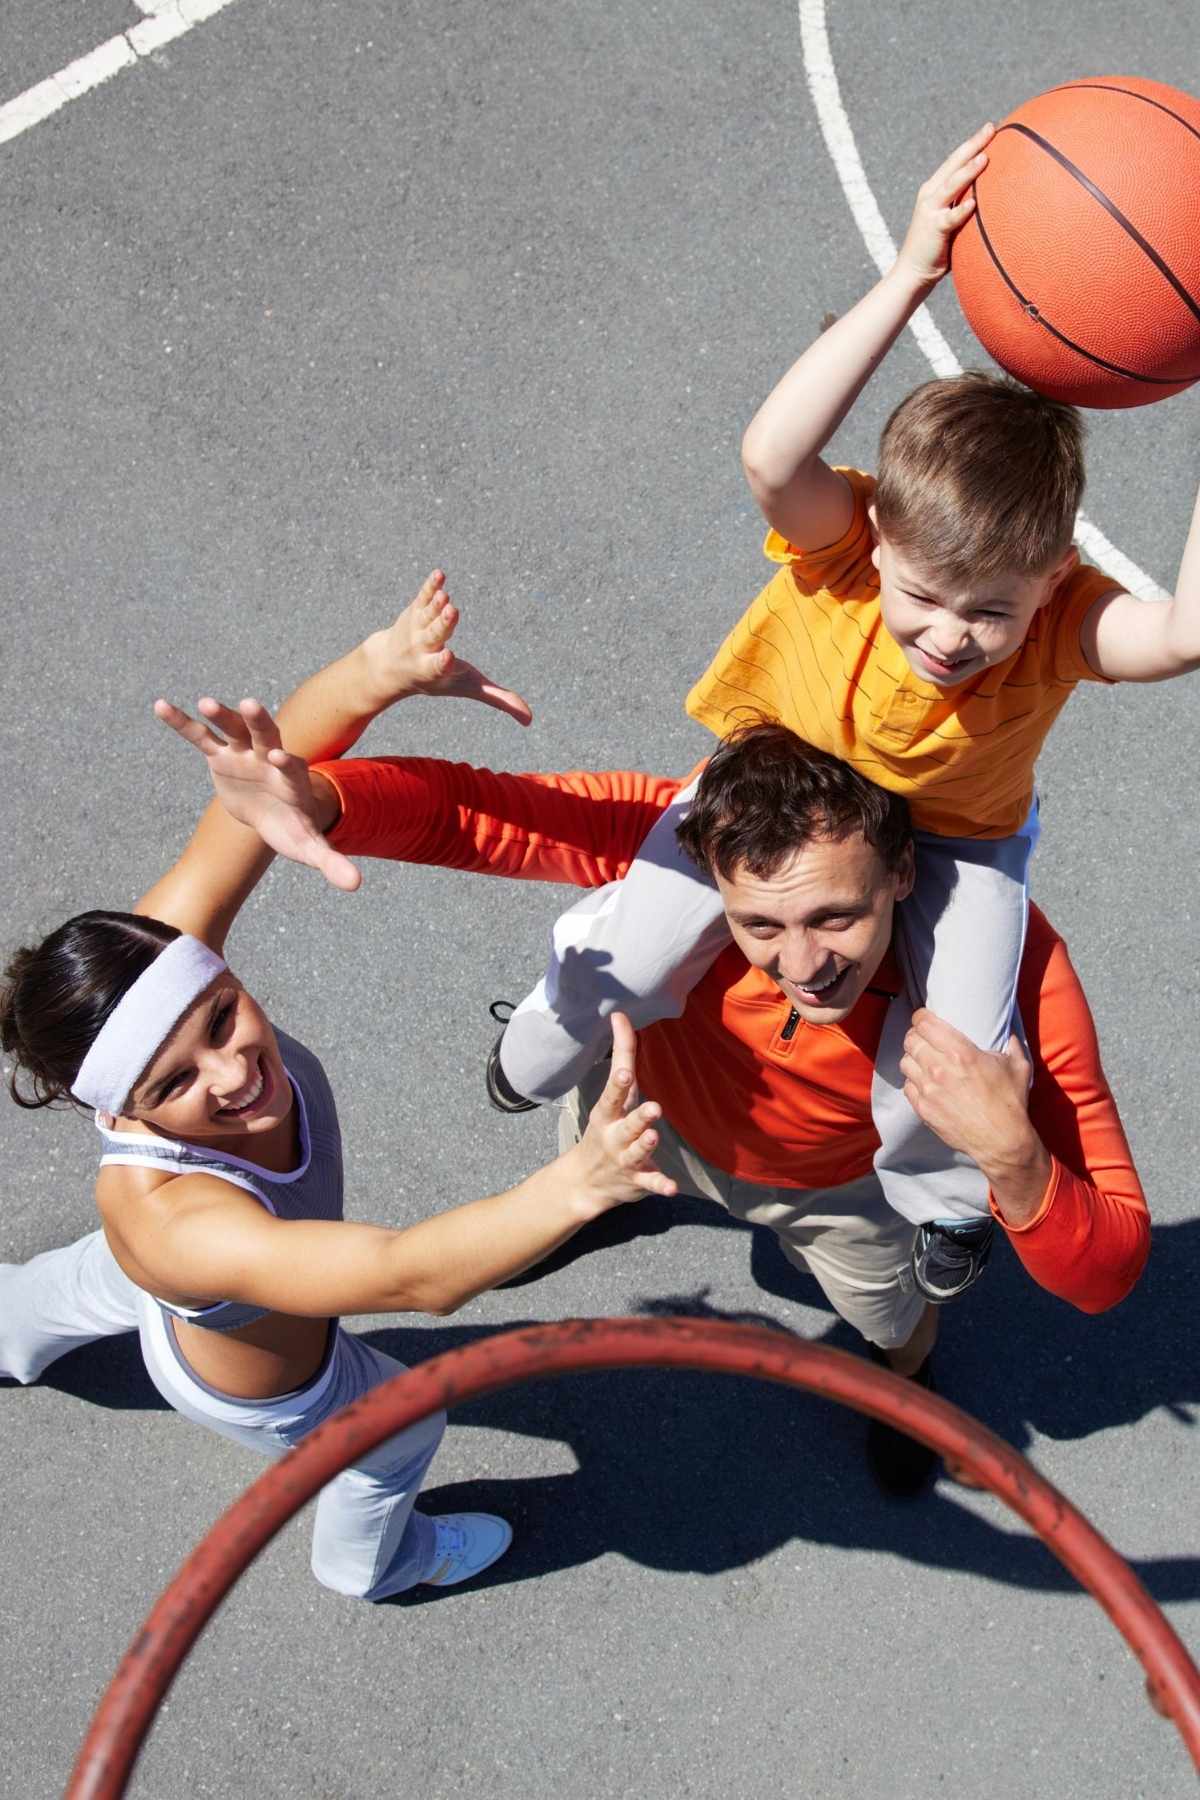 play a game of hoops with your family for exercise